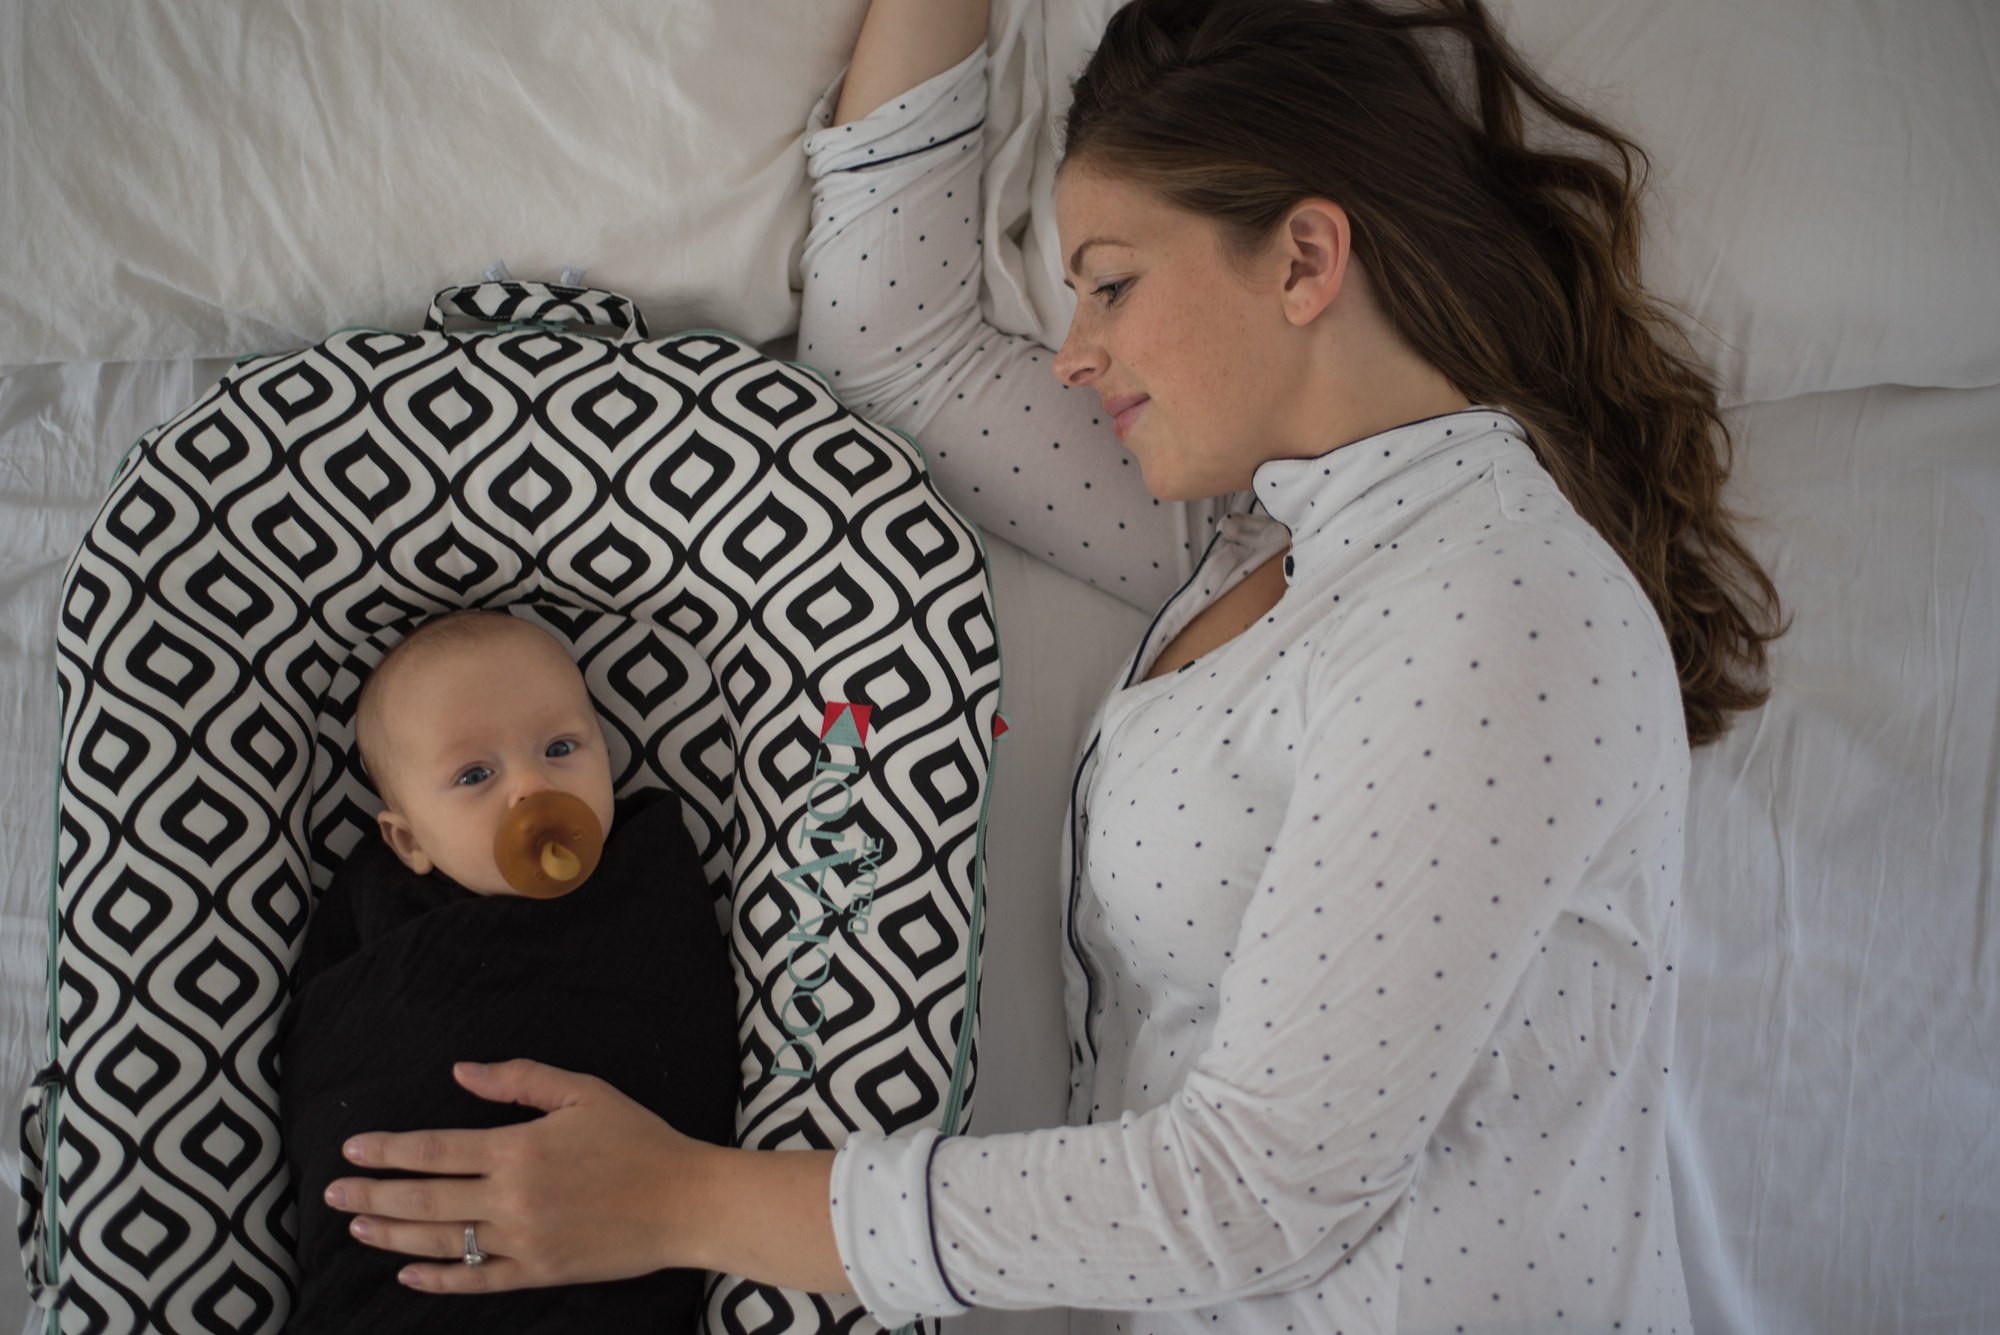 The Dock-A-Tot is the perfect little space for baby and helps parents have a way to calm and transfer baby from co-sleeping to their own crib.